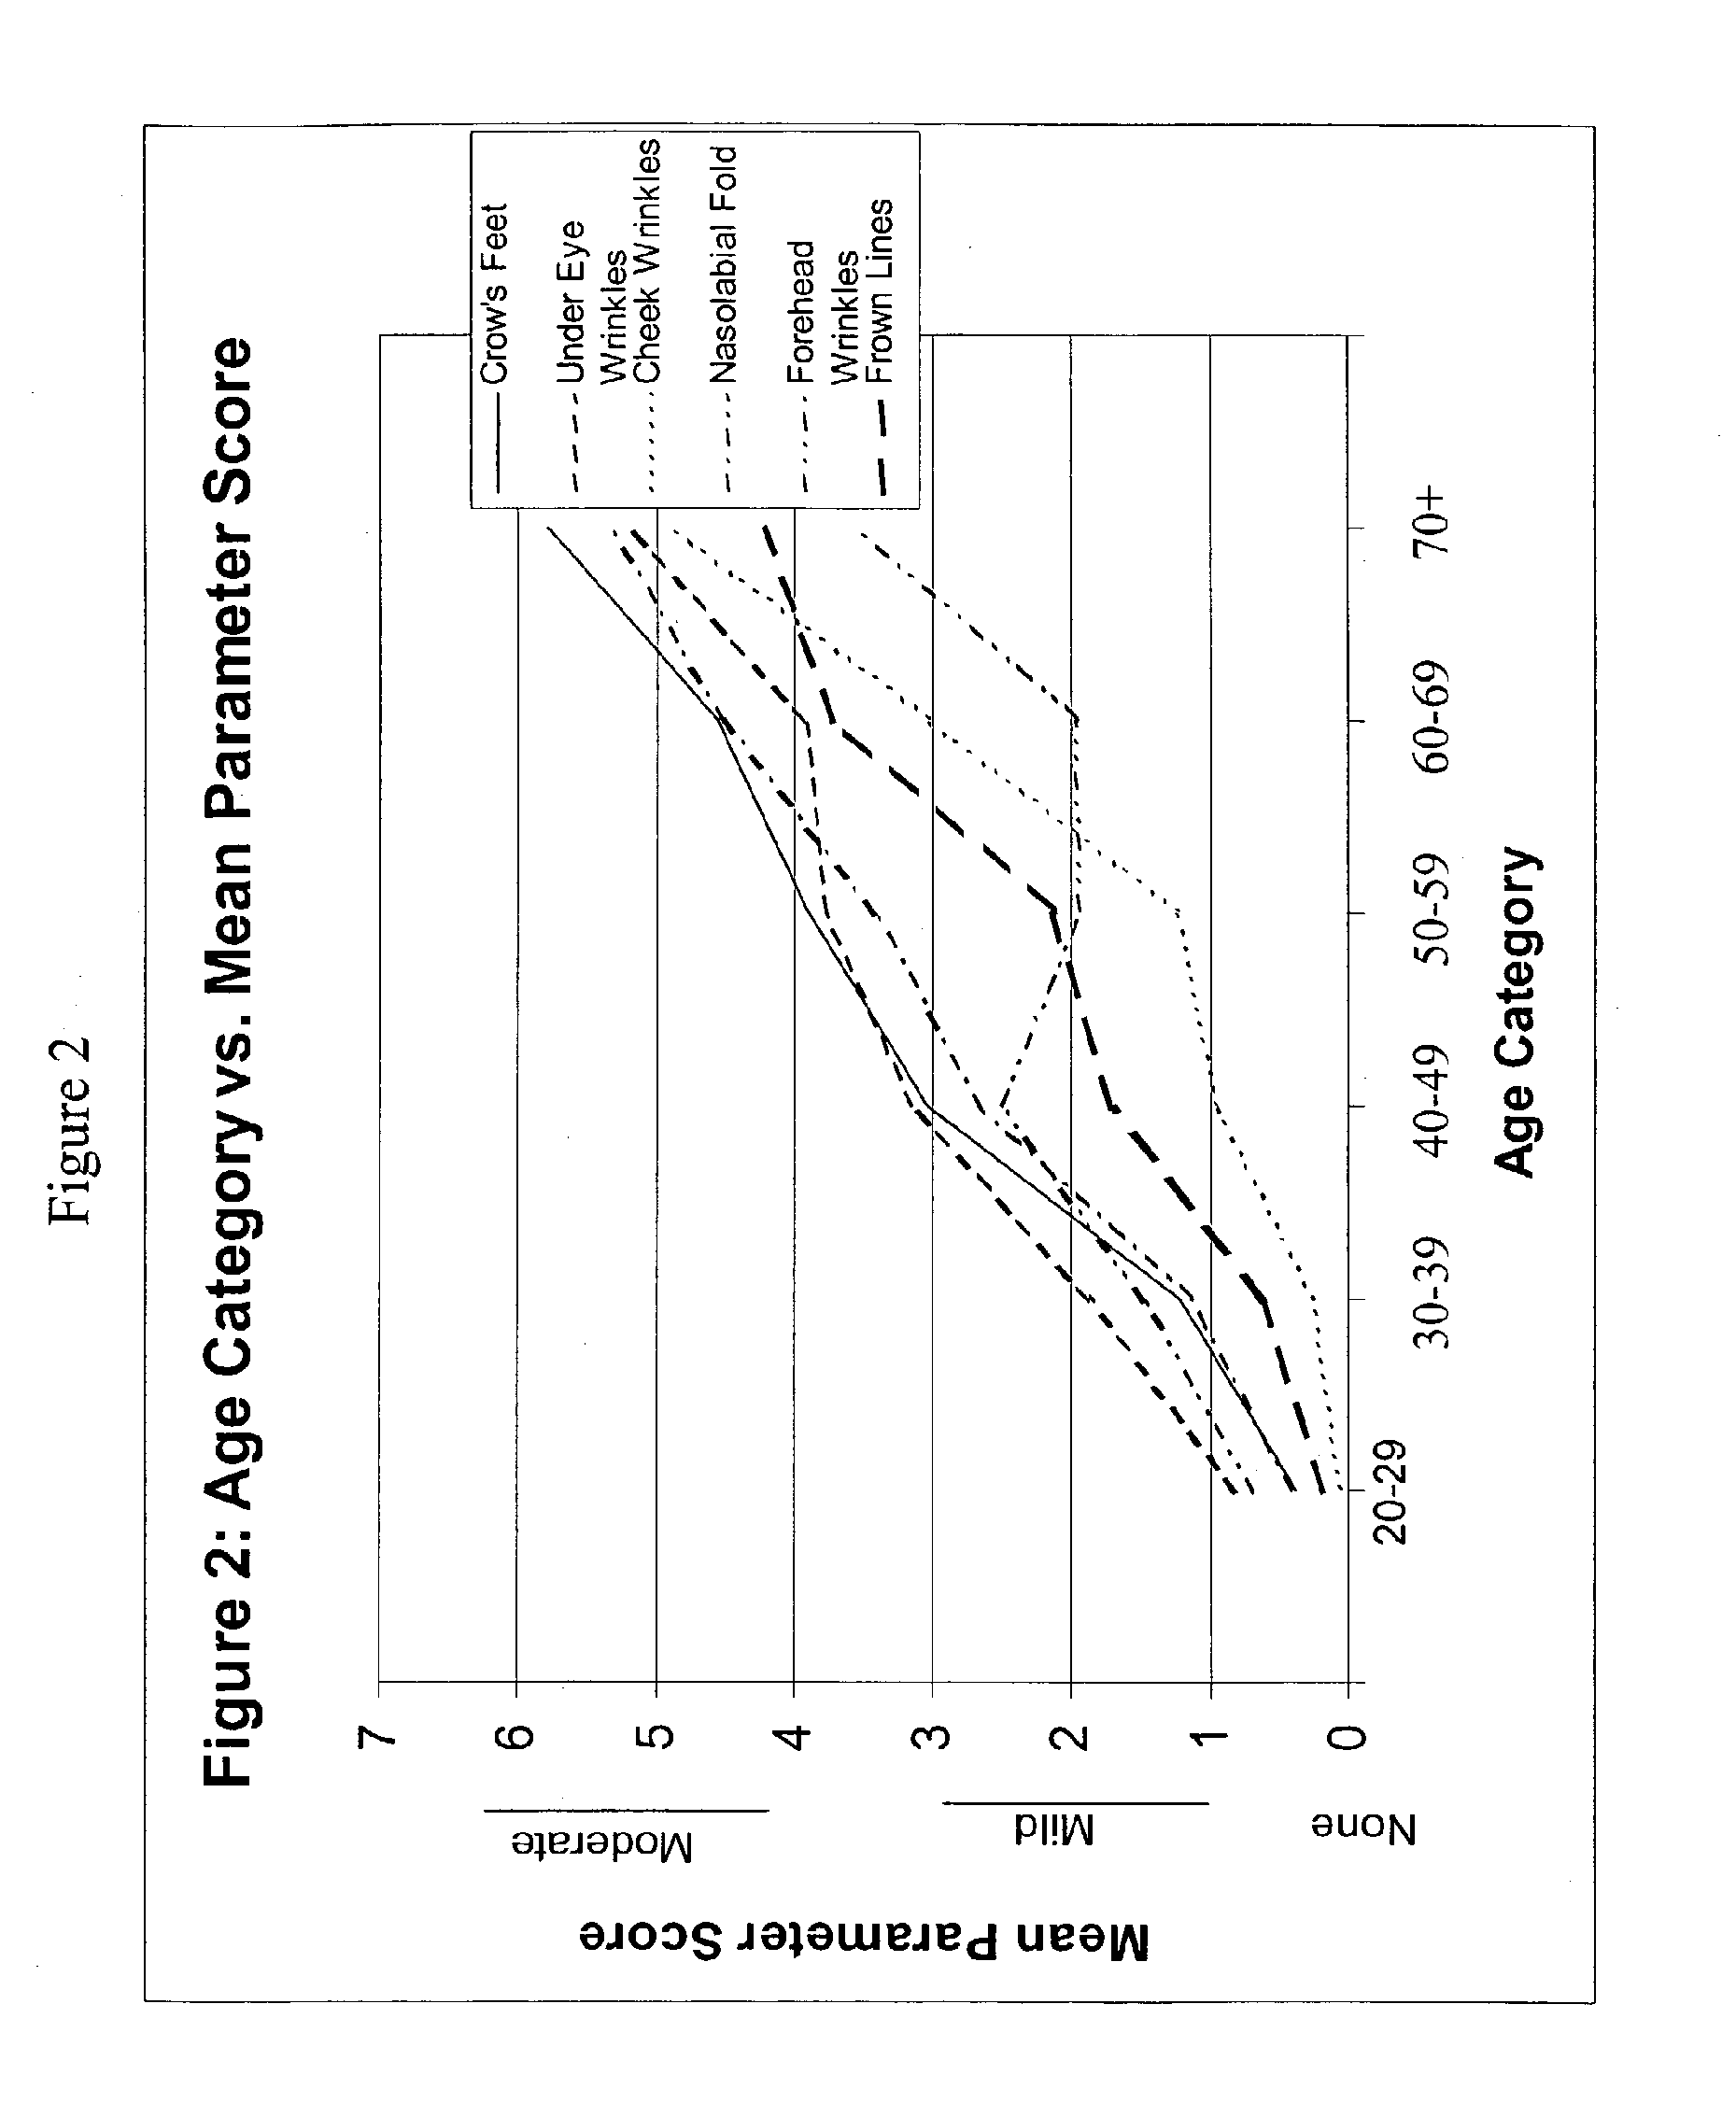 Method of Measuring the Efficacy of a Skin Treatment Program